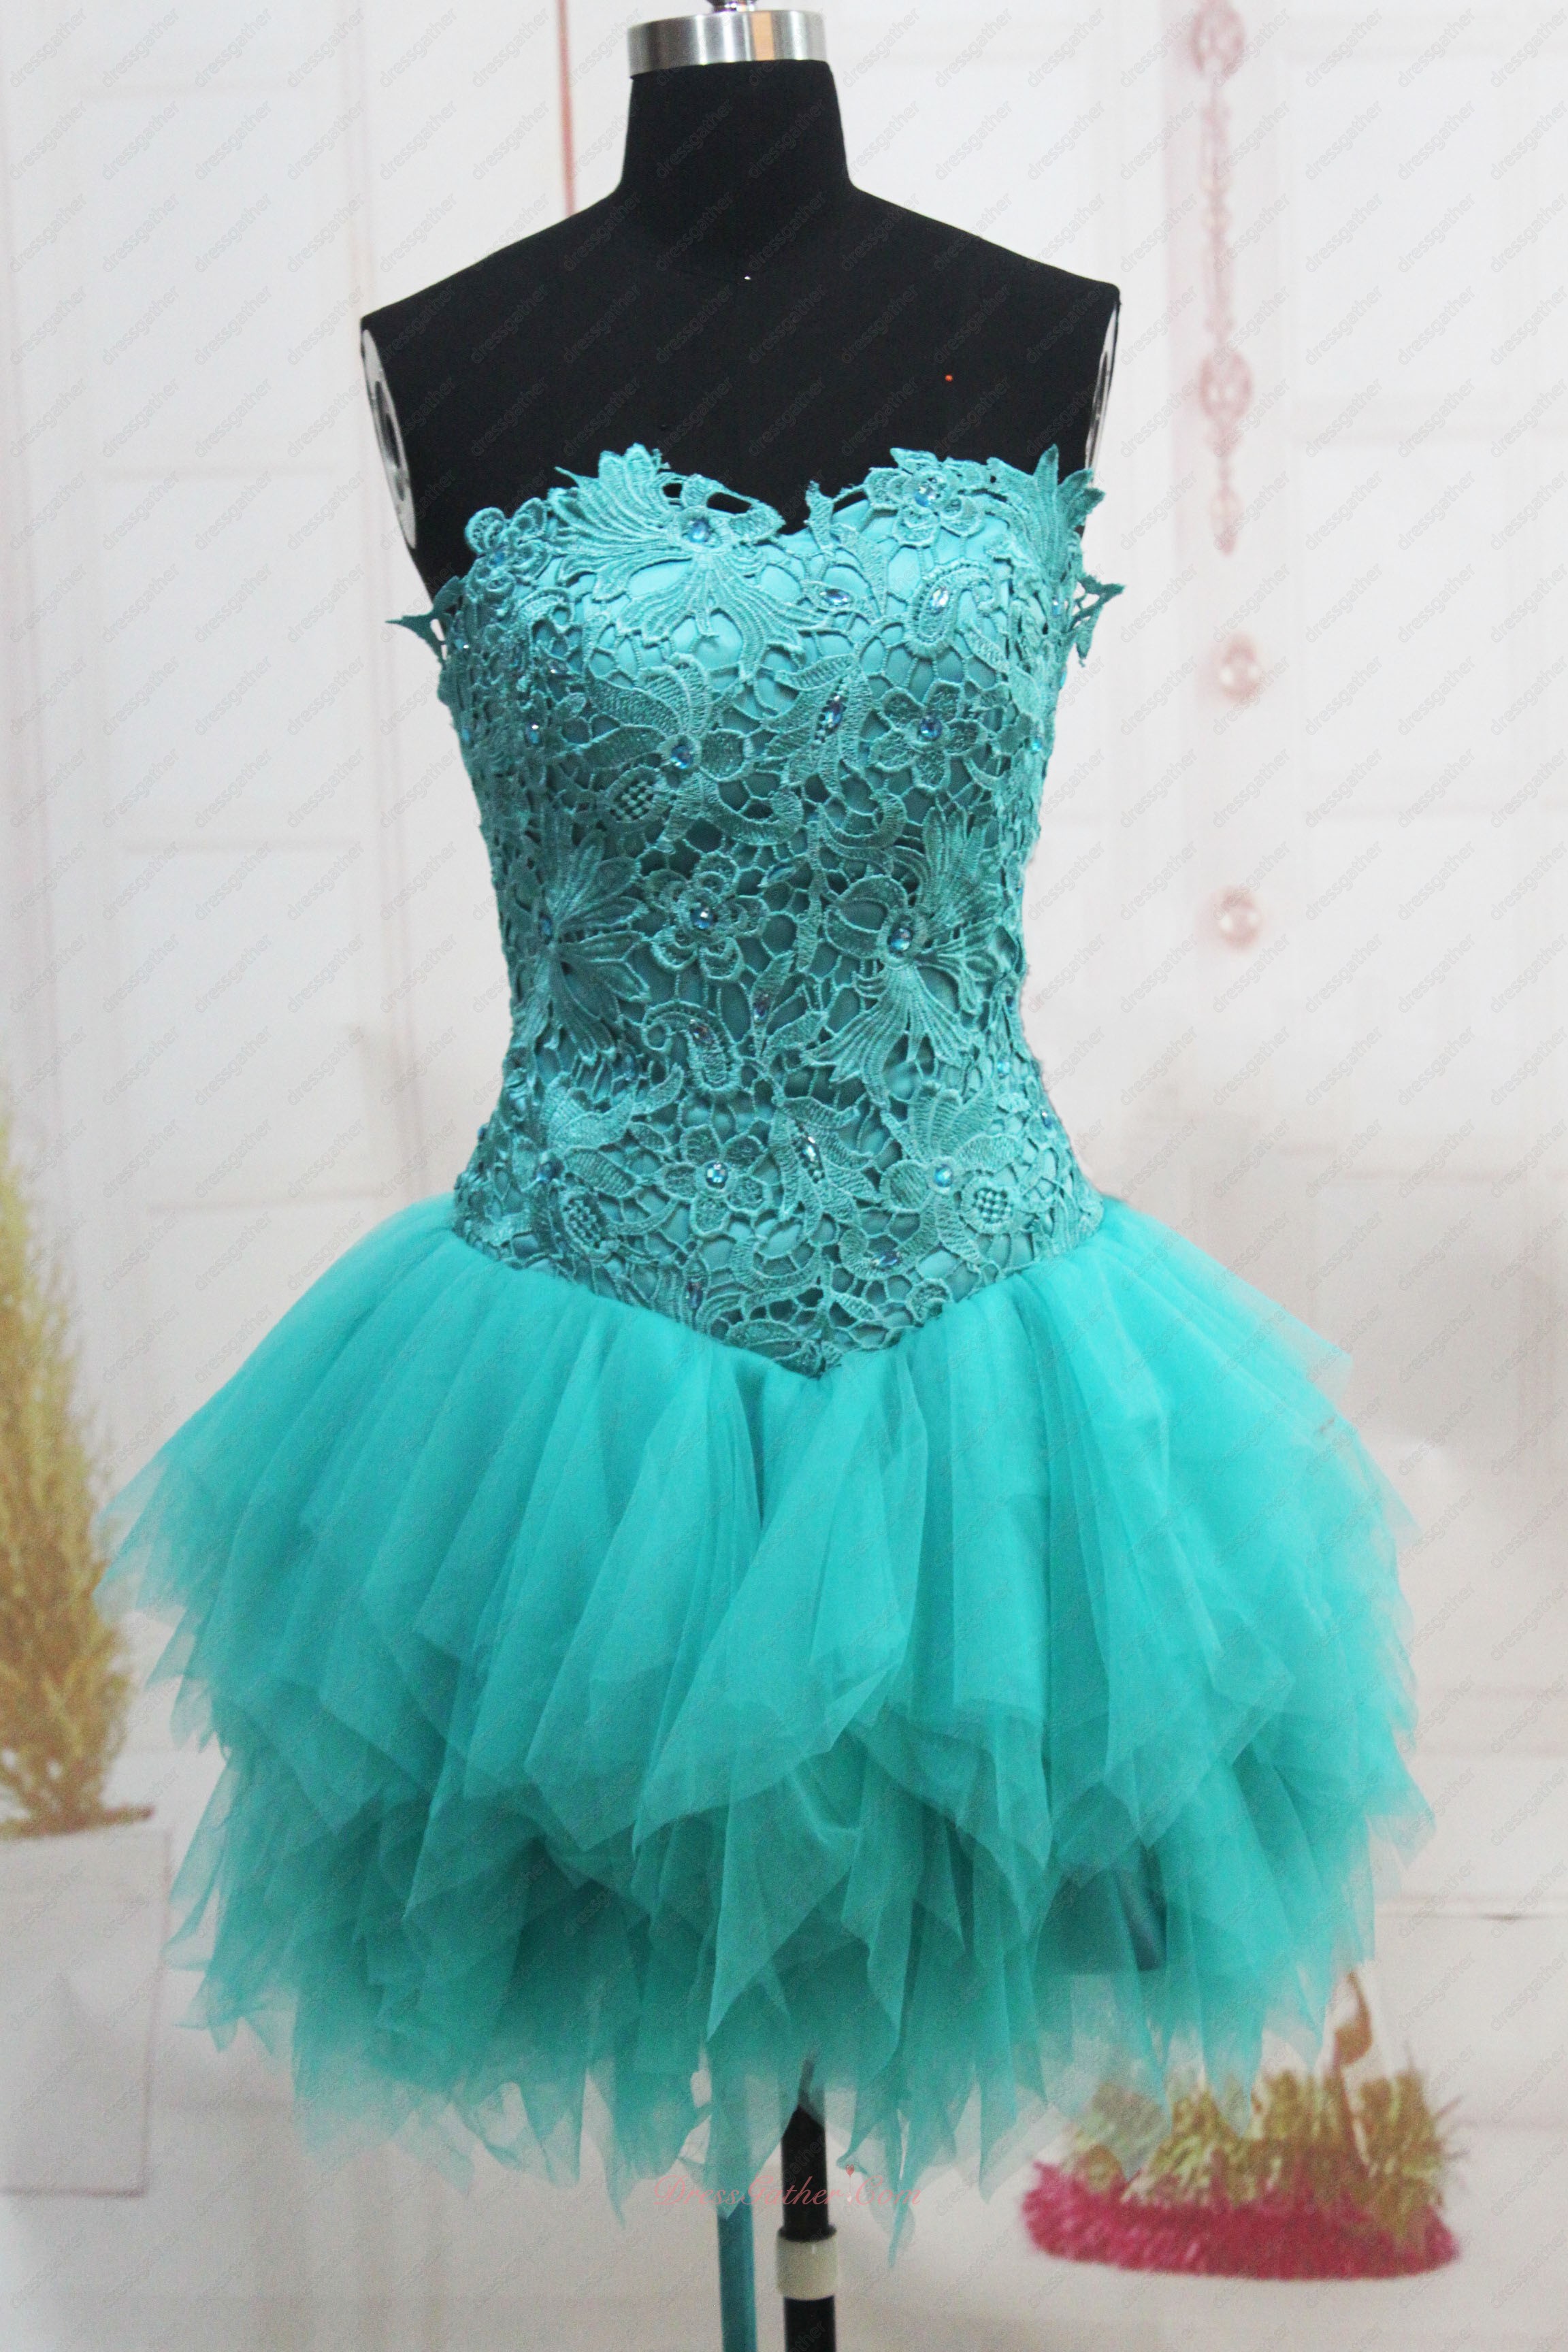 Turquoise Strapless Lace Bodice For Homecoming With Triangle Tulle Skirt - Click Image to Close